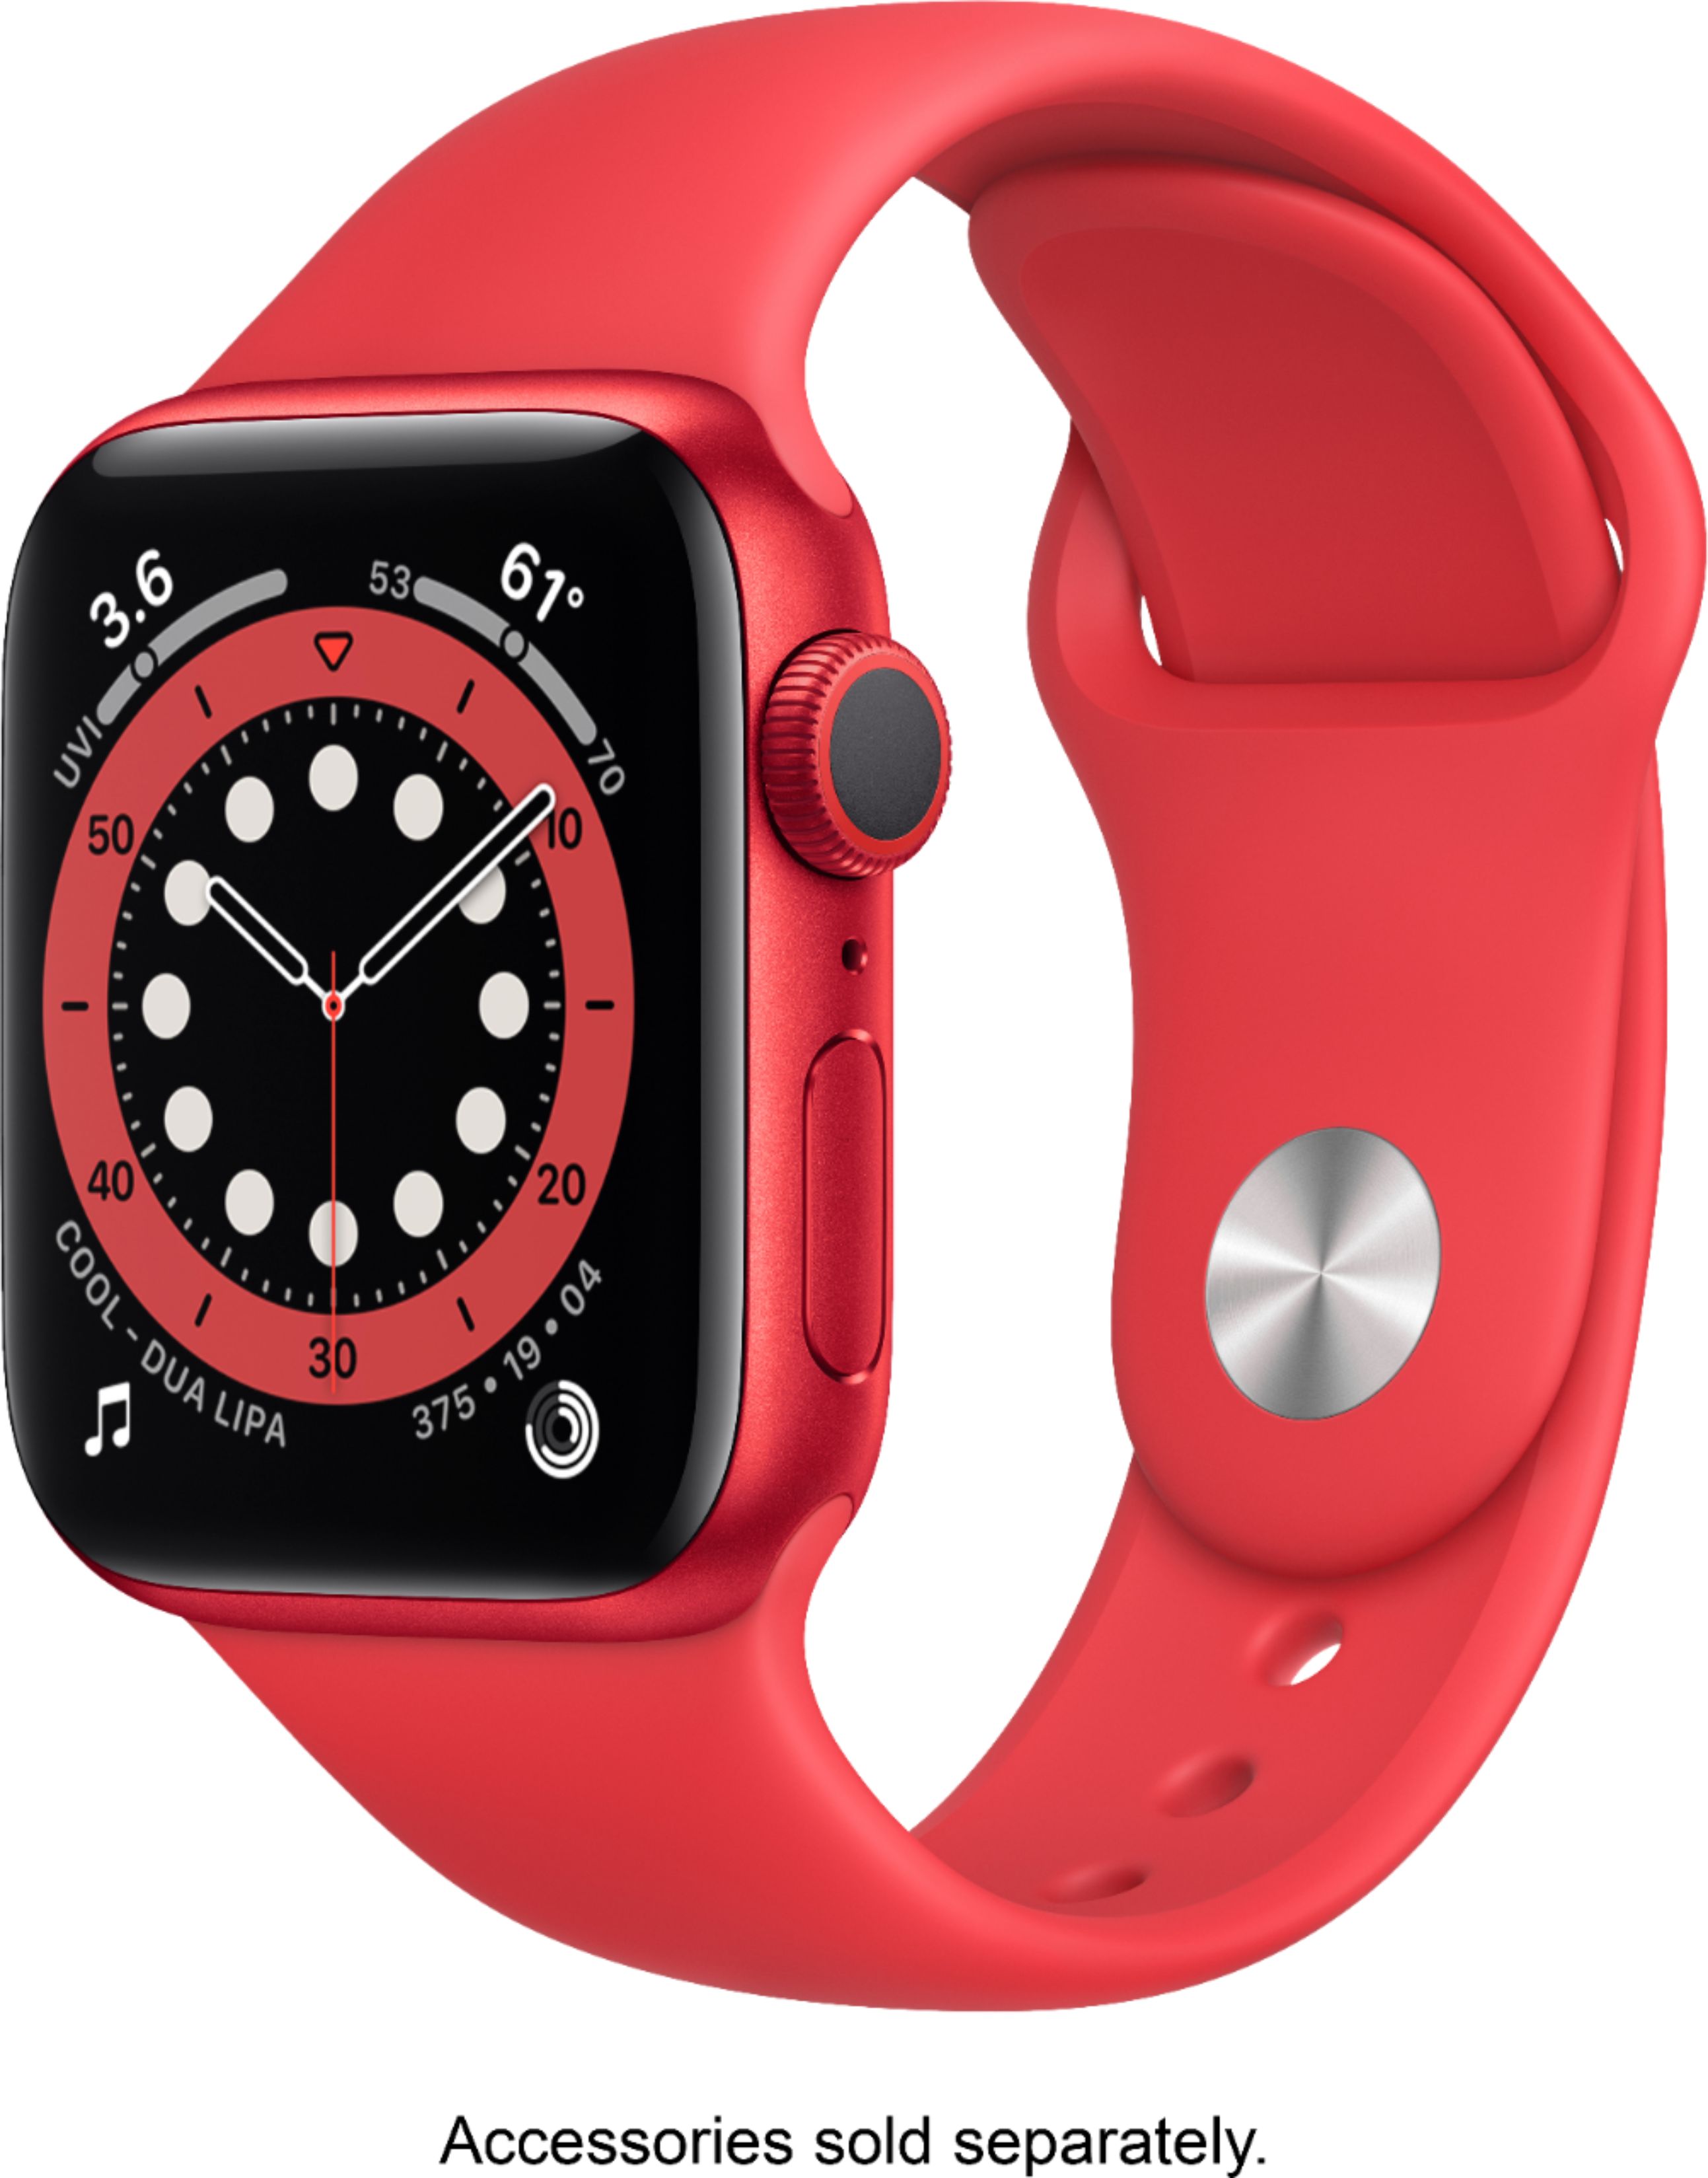 Apple Watch Series 6 Gps 40mm Product Red Aluminum Case With Product Red Sport Band Product Red M00a3ll A Best Buy